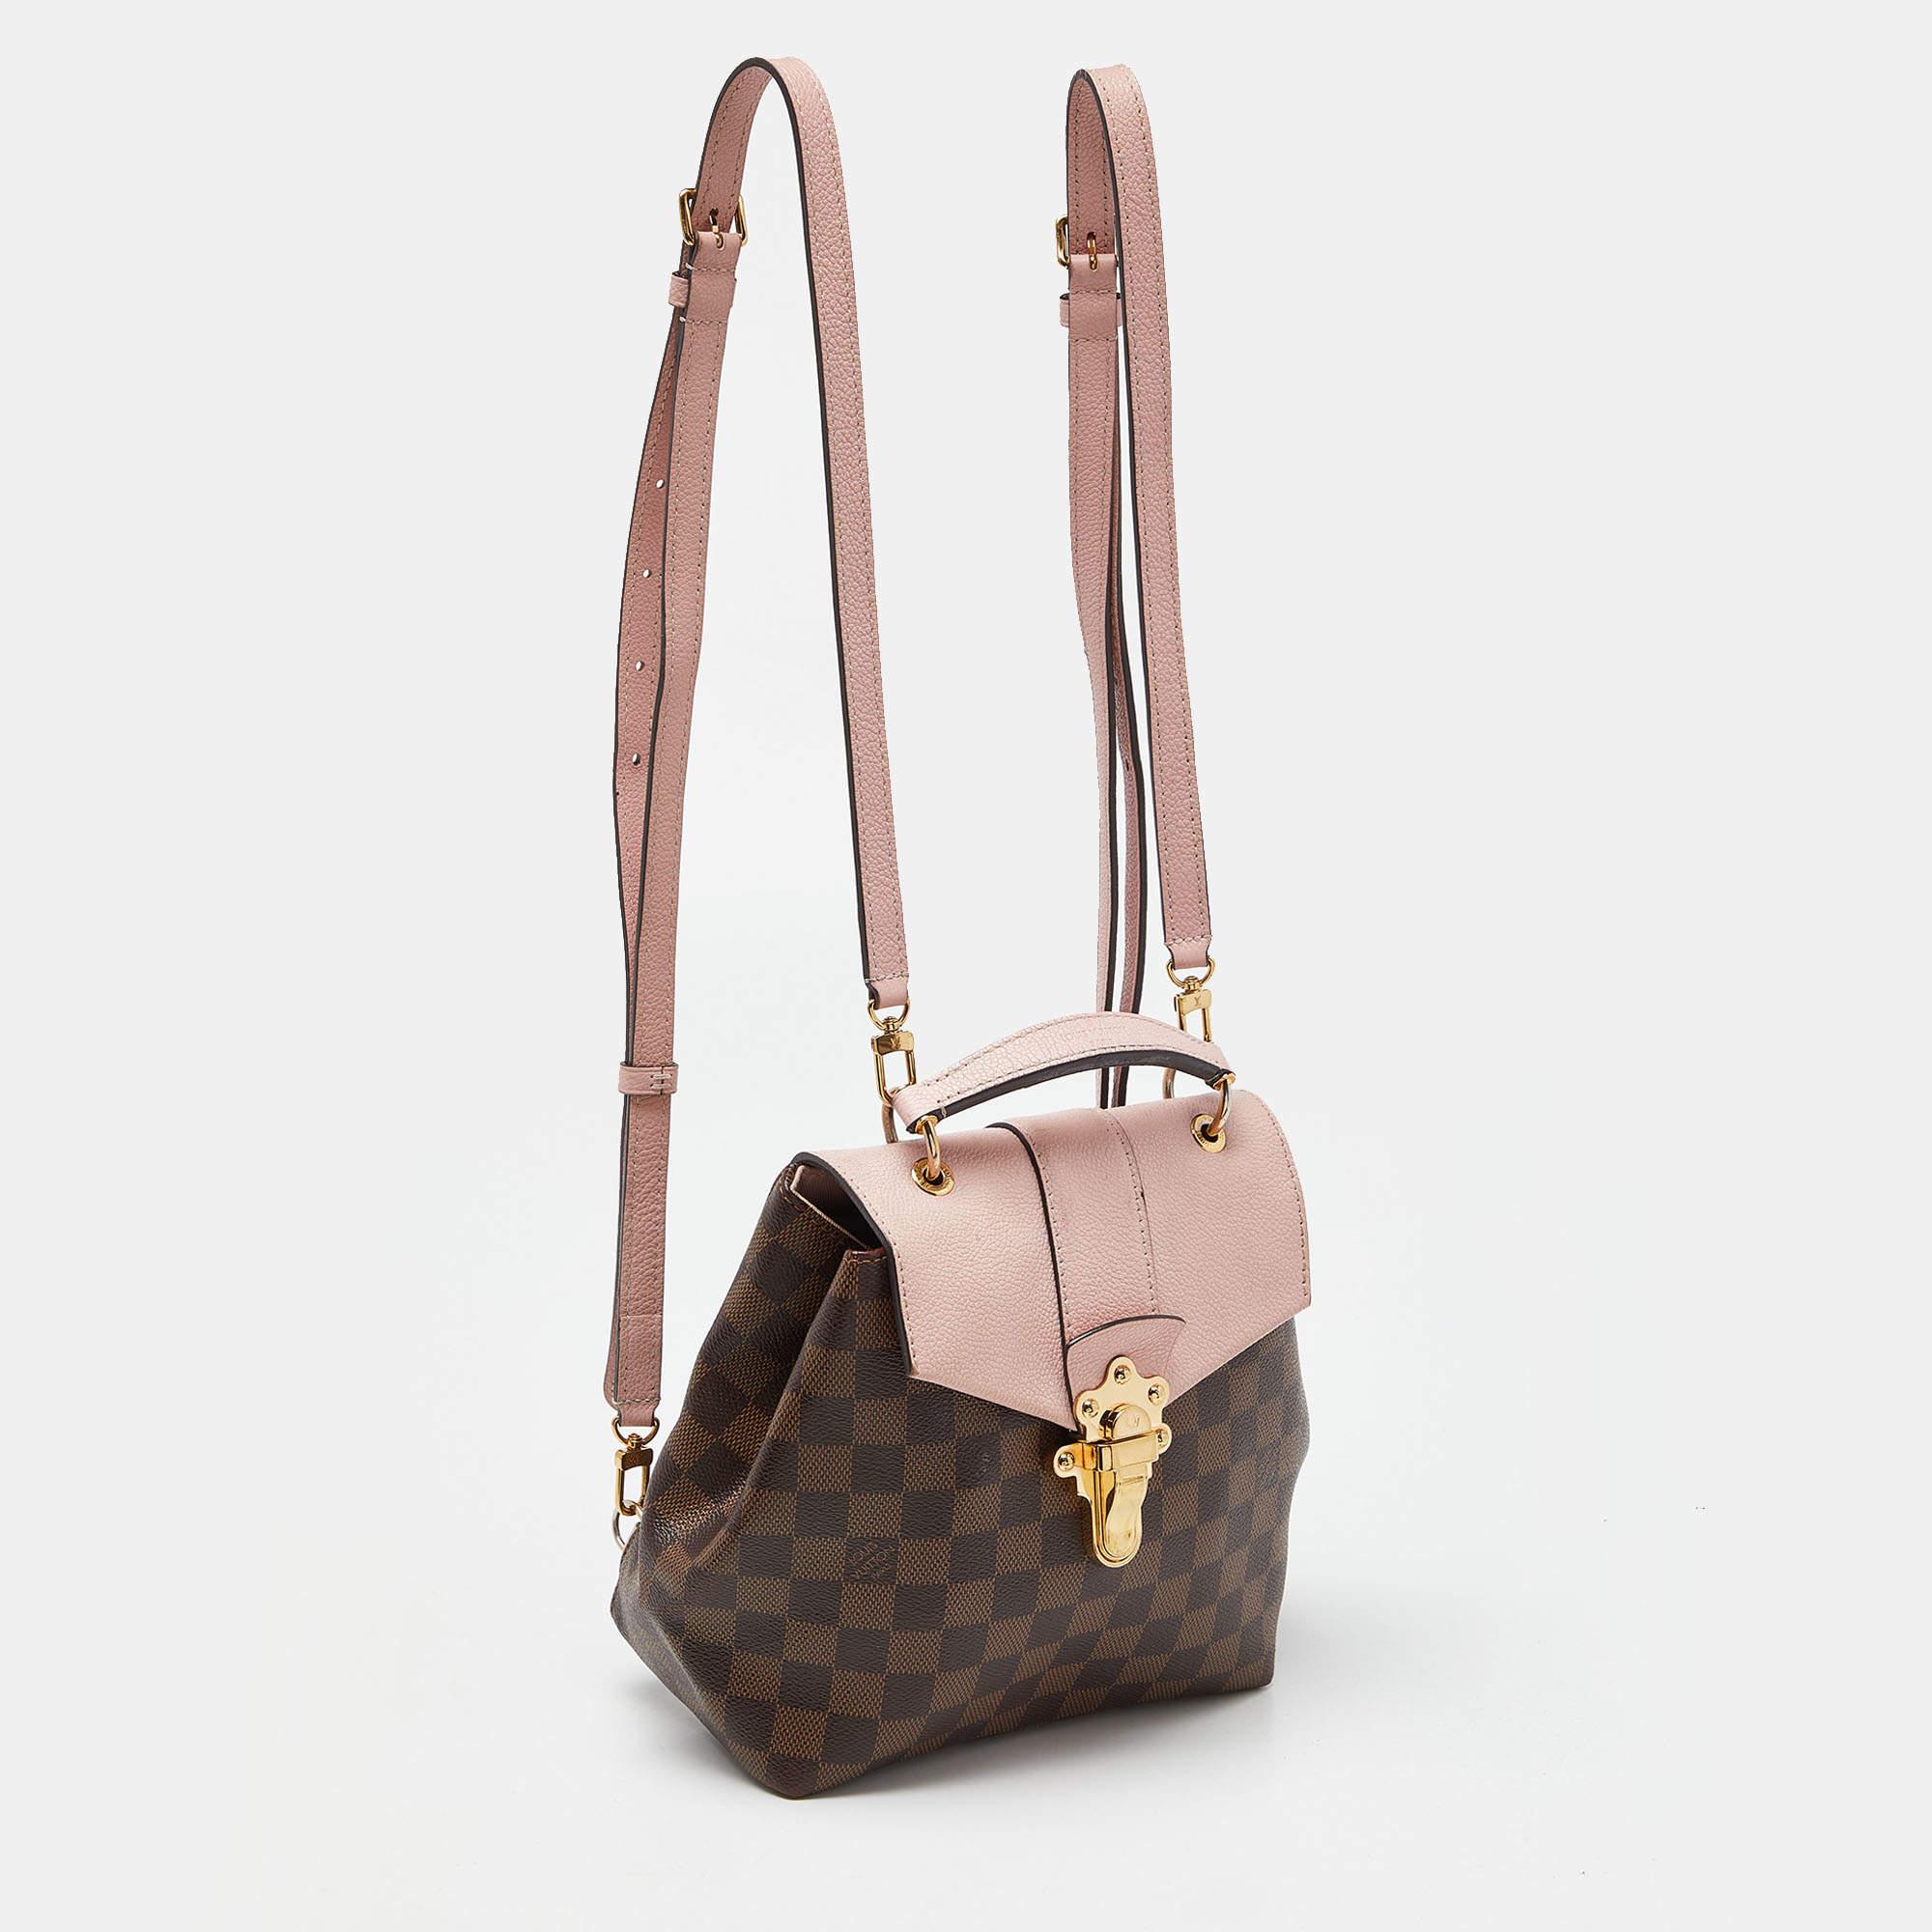 For days of ease and fashion, Louis Vuitton brings you this Clapton backpack. It is made from the brand's signature Damier Ebene canvas as well as leather into a lovely design. The creation features a gold-tone lock on the flap, a leather top